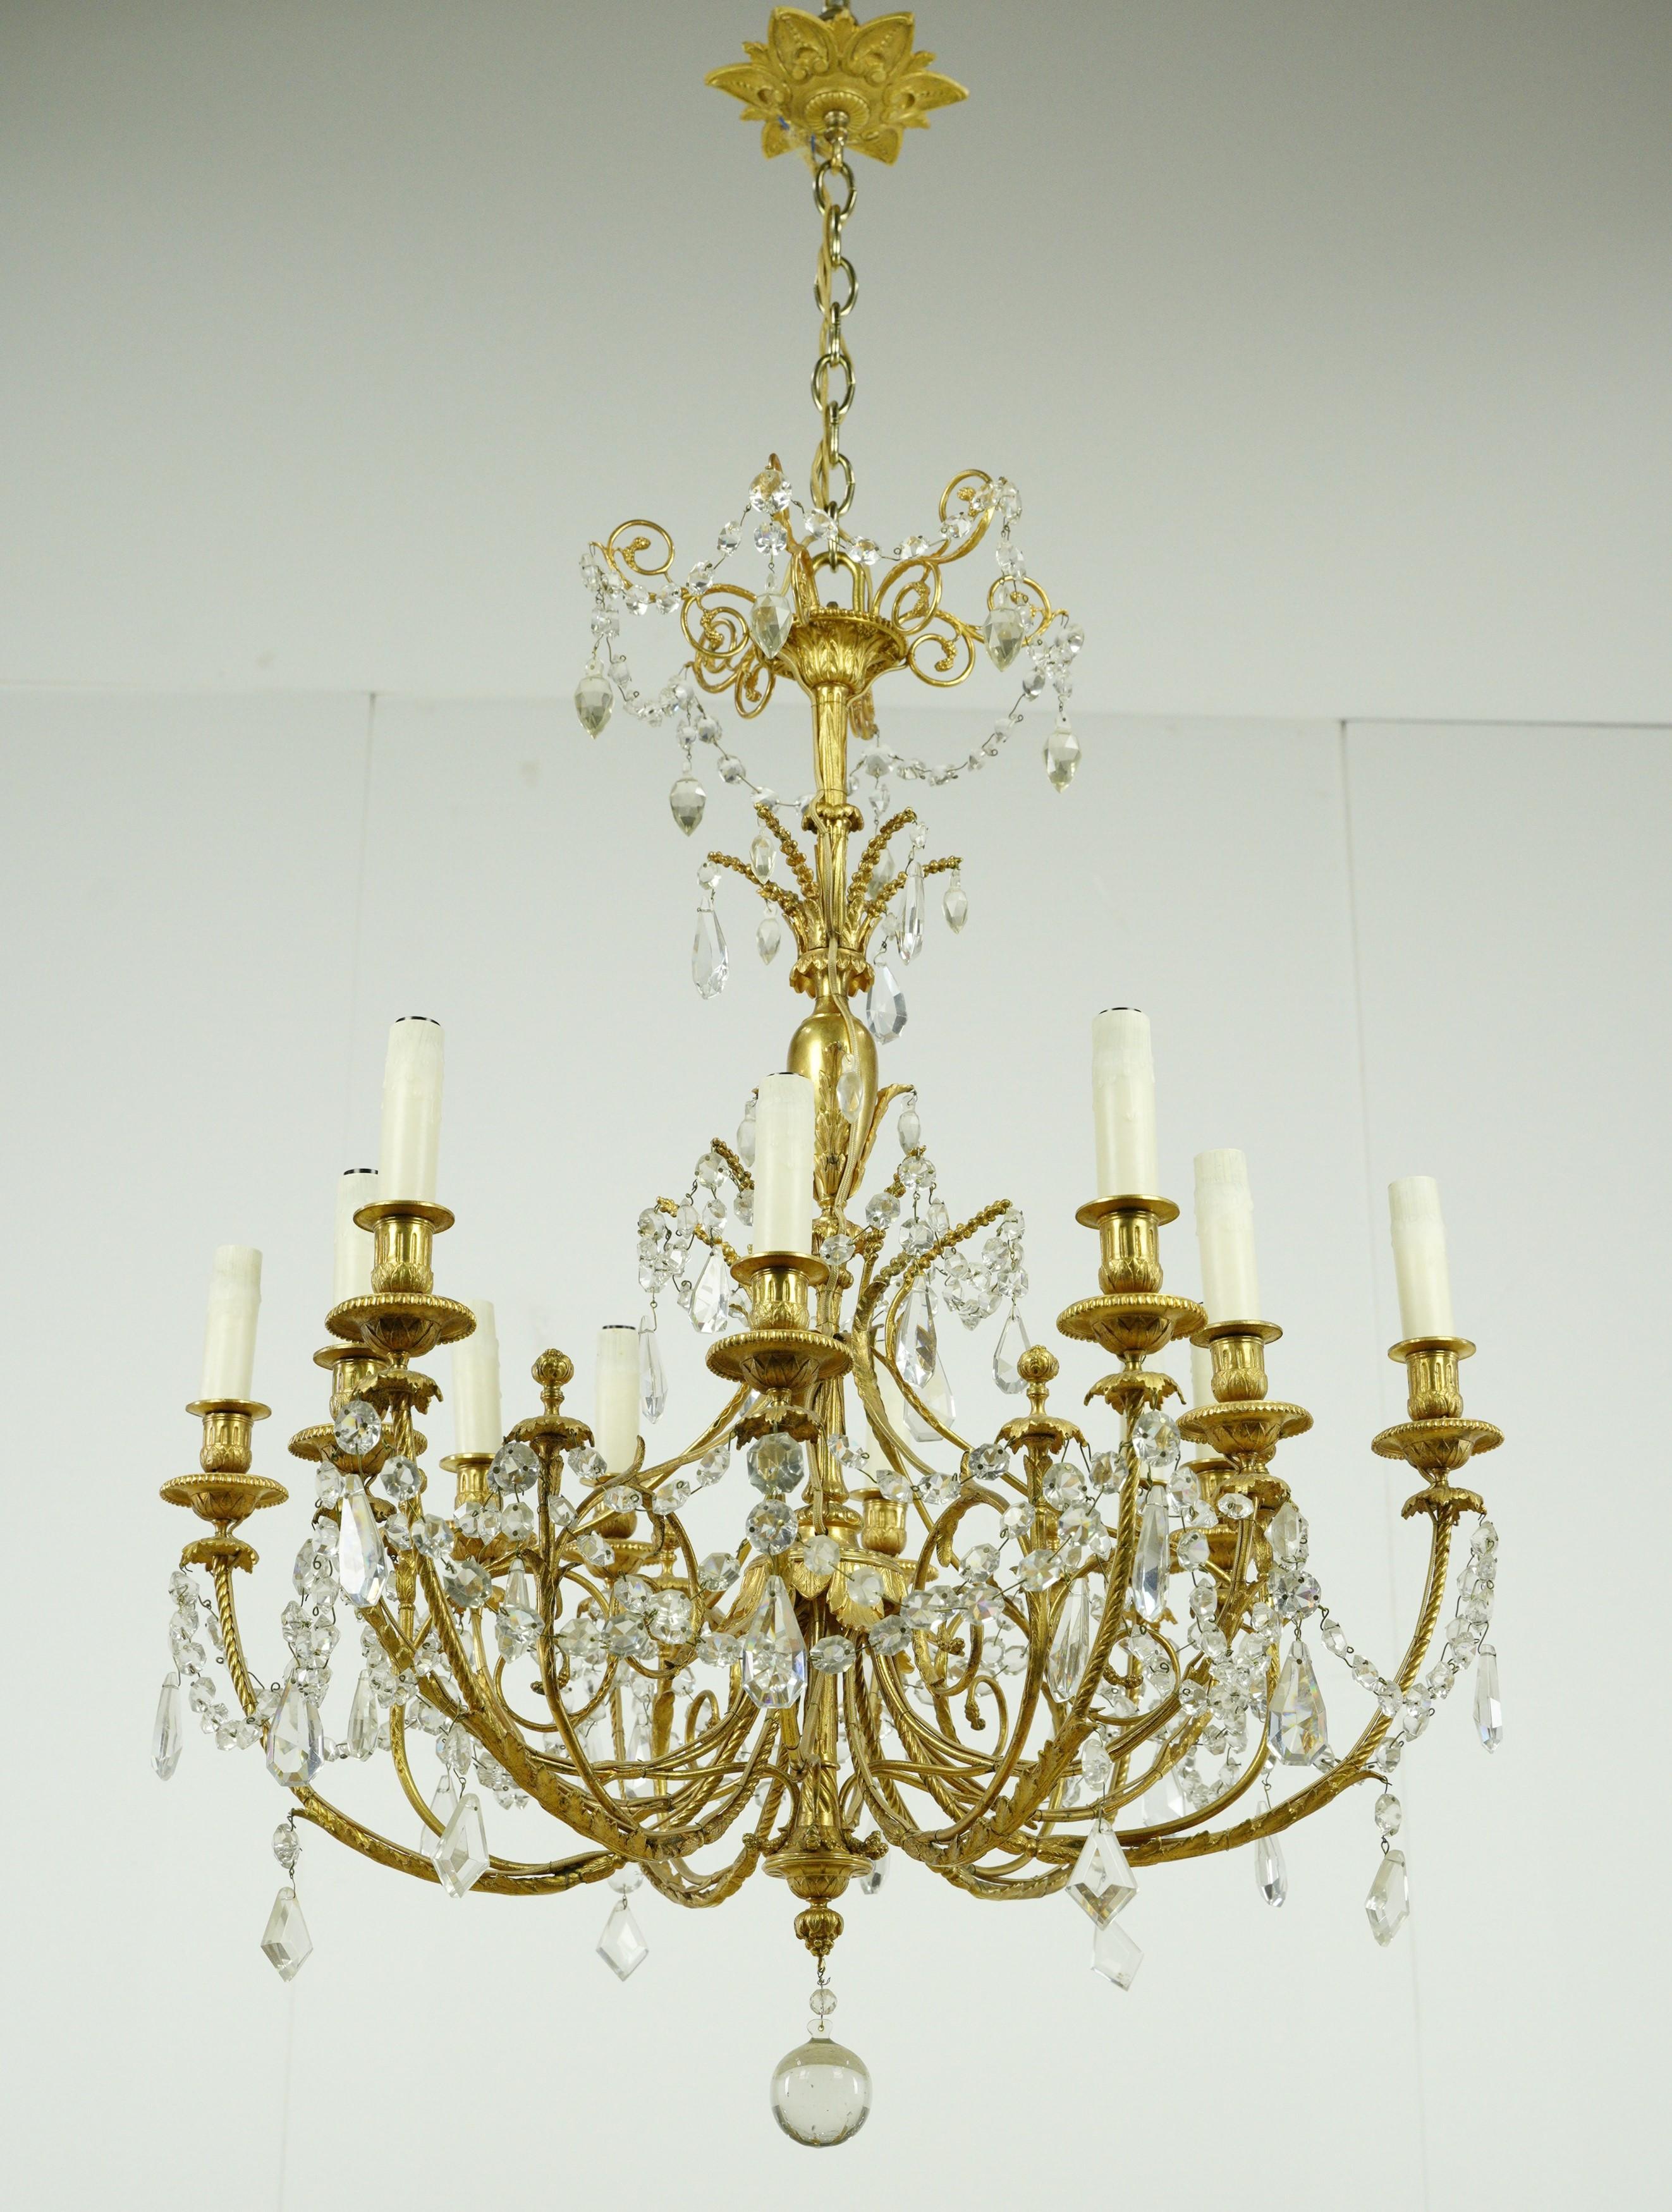 This resplendent piece features an intricately designed gold-plated frame, exuding ornate craftsmanship that enhances its overall aesthetic. Clear crystals gracefully drape throughout the chandelier, adding a touch of opulence and brilliance to its